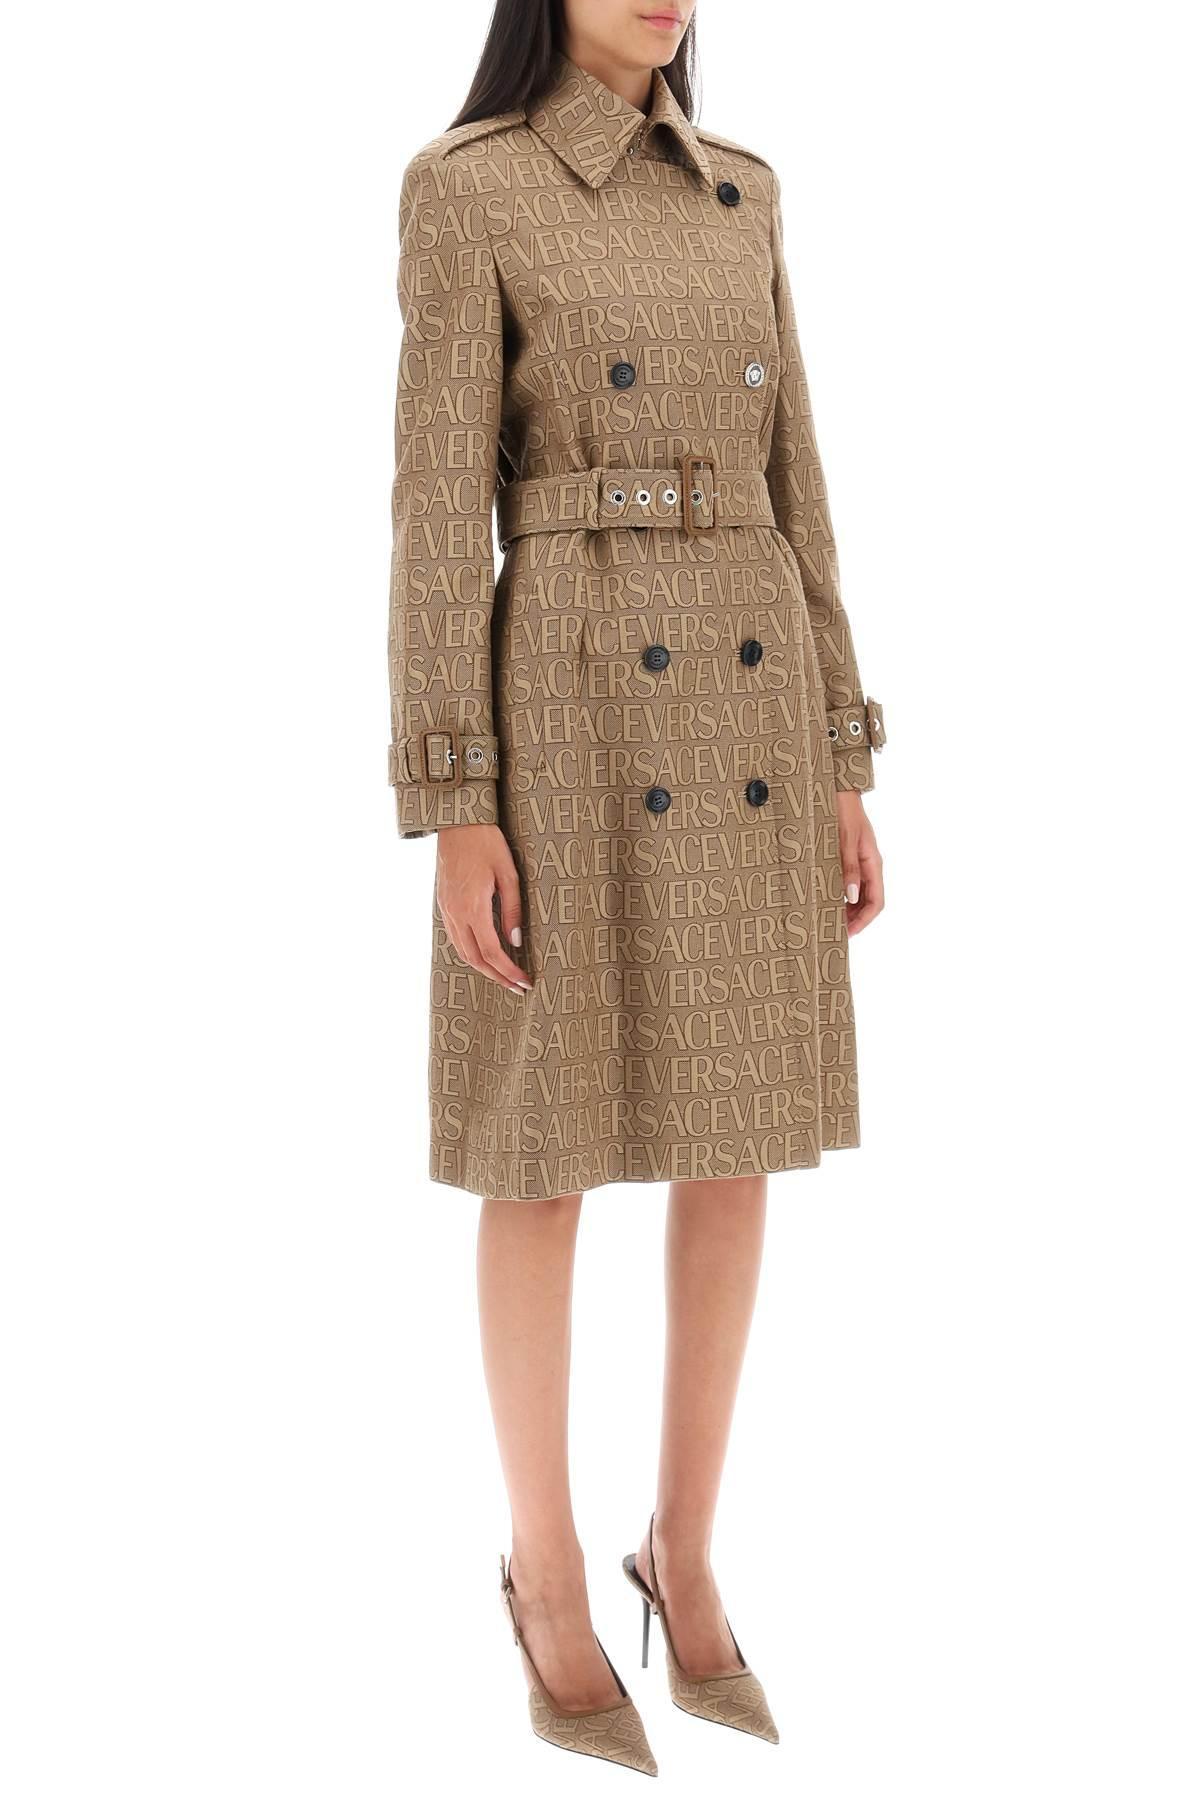 Louis Vuitton double breasted belted logo monogram trench coat women